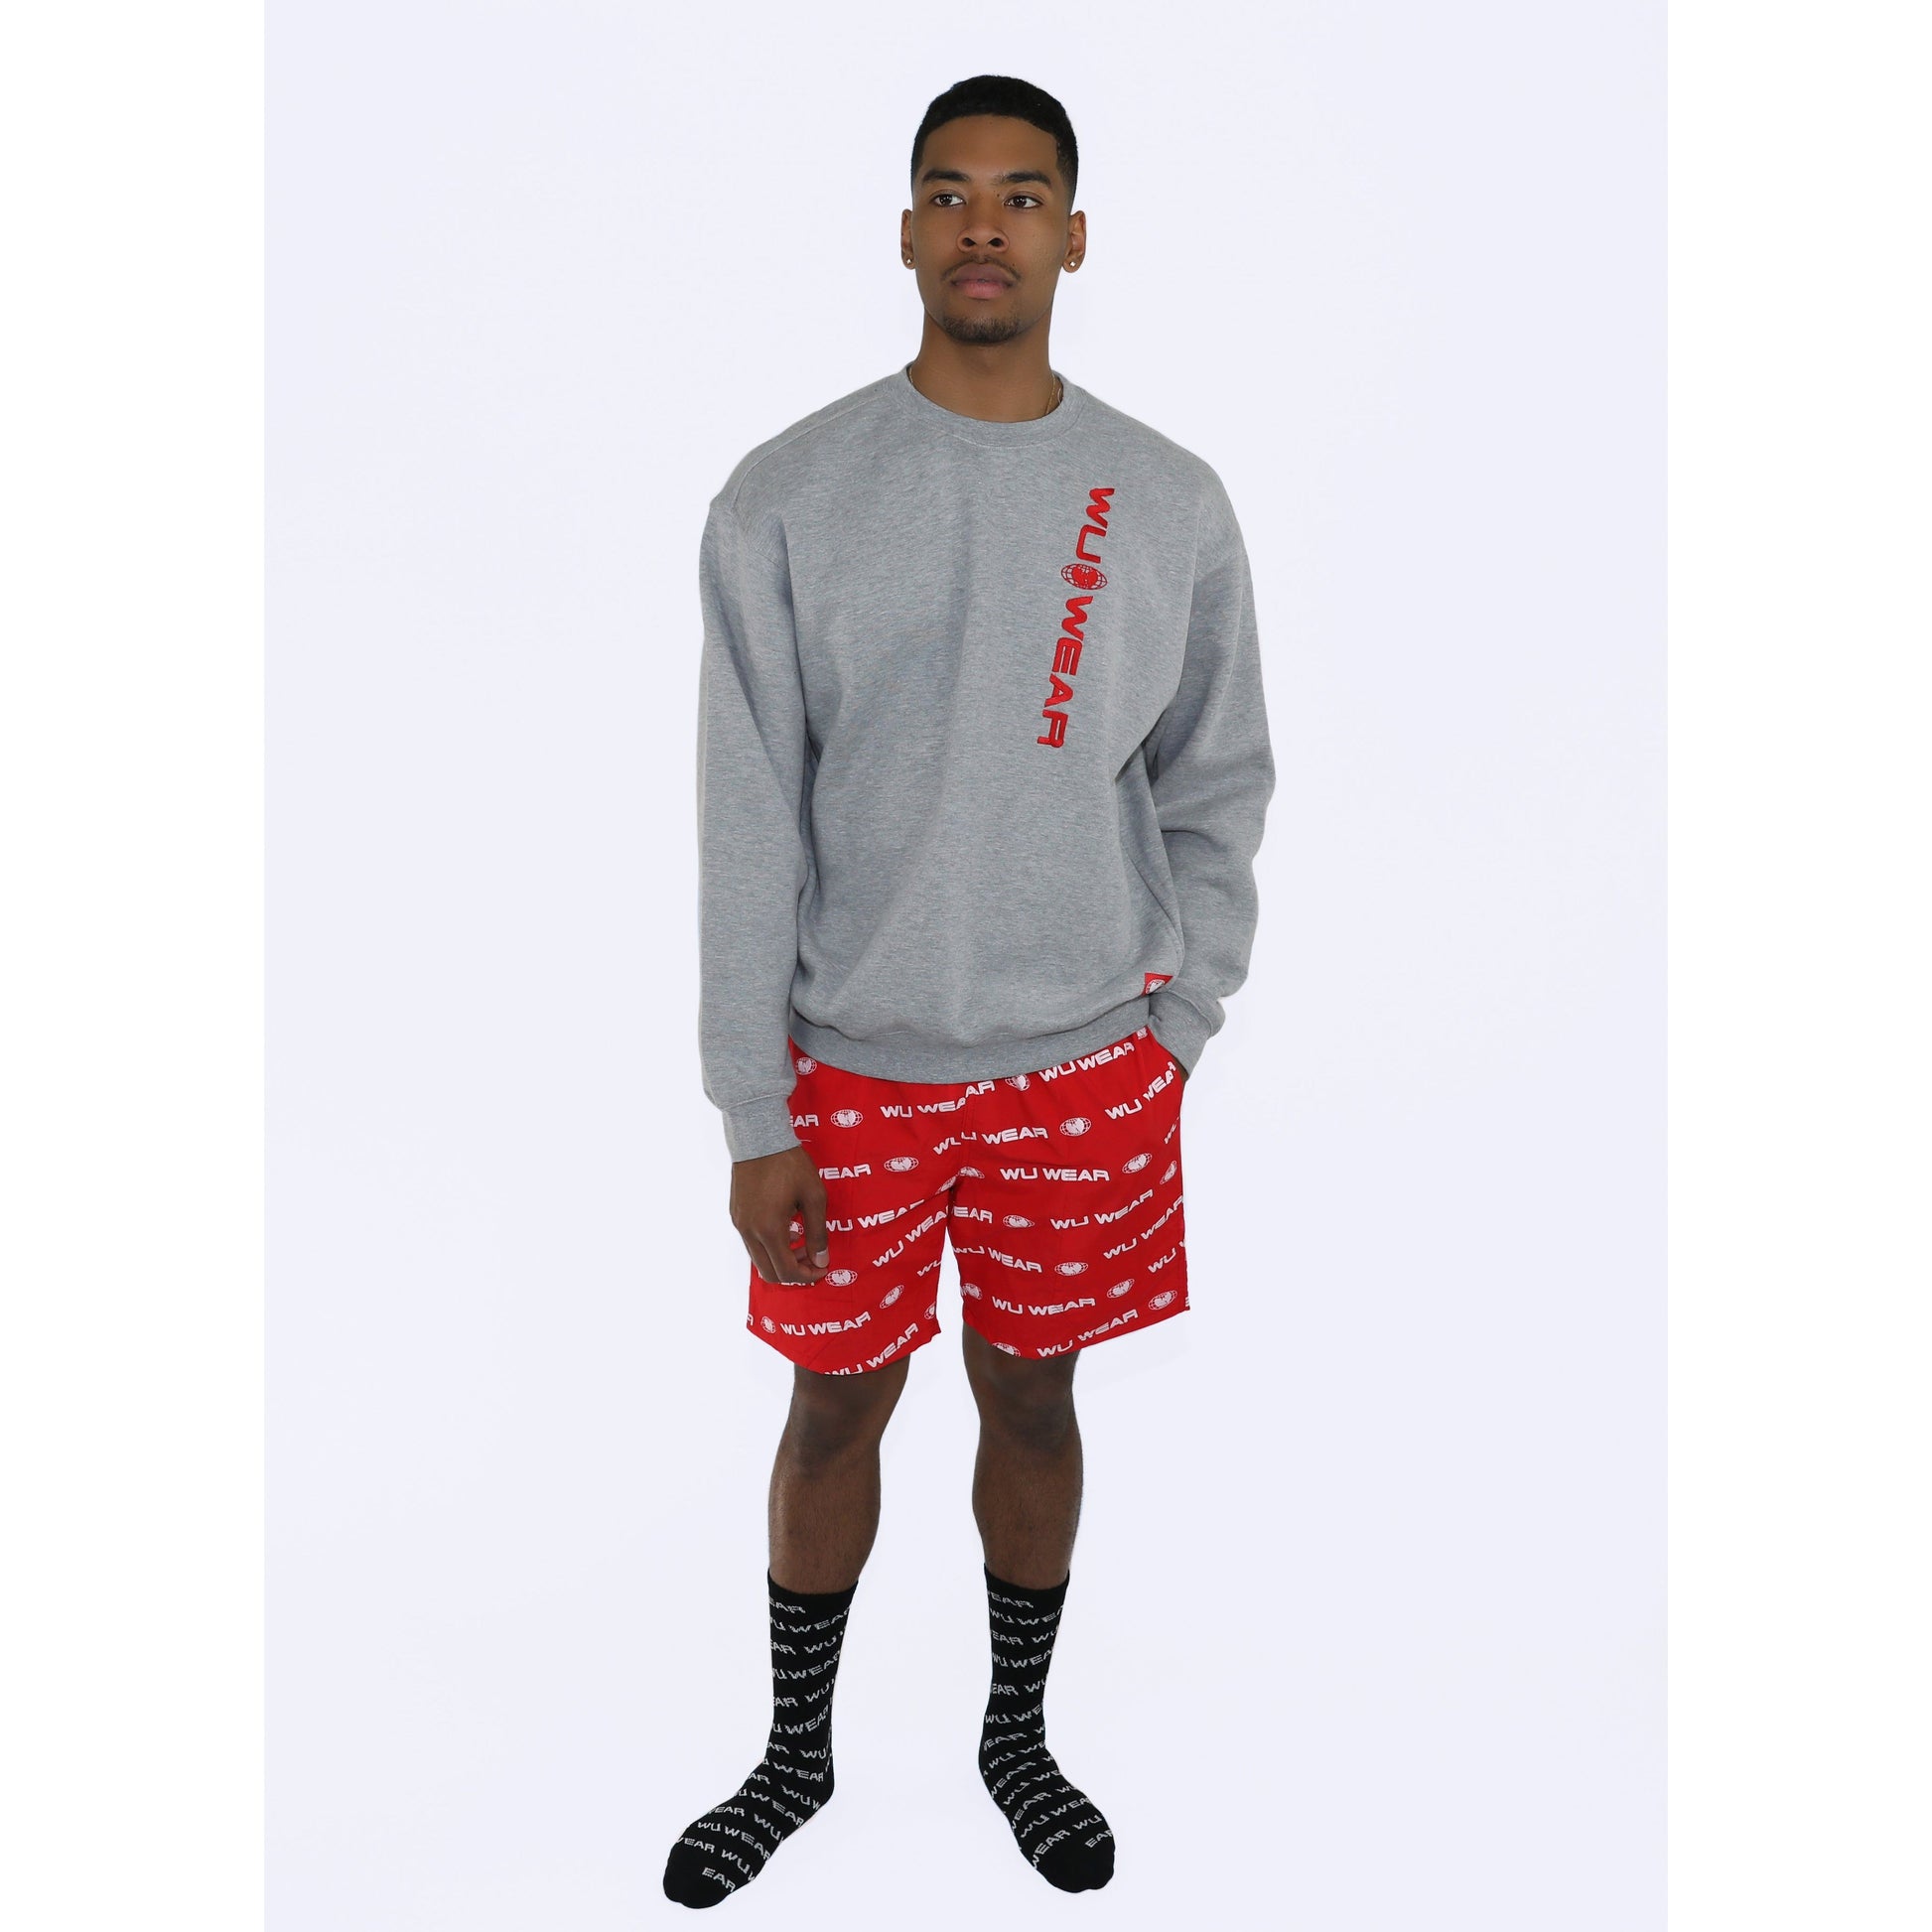 THE CITY SHORTS - RED - Wu Wear